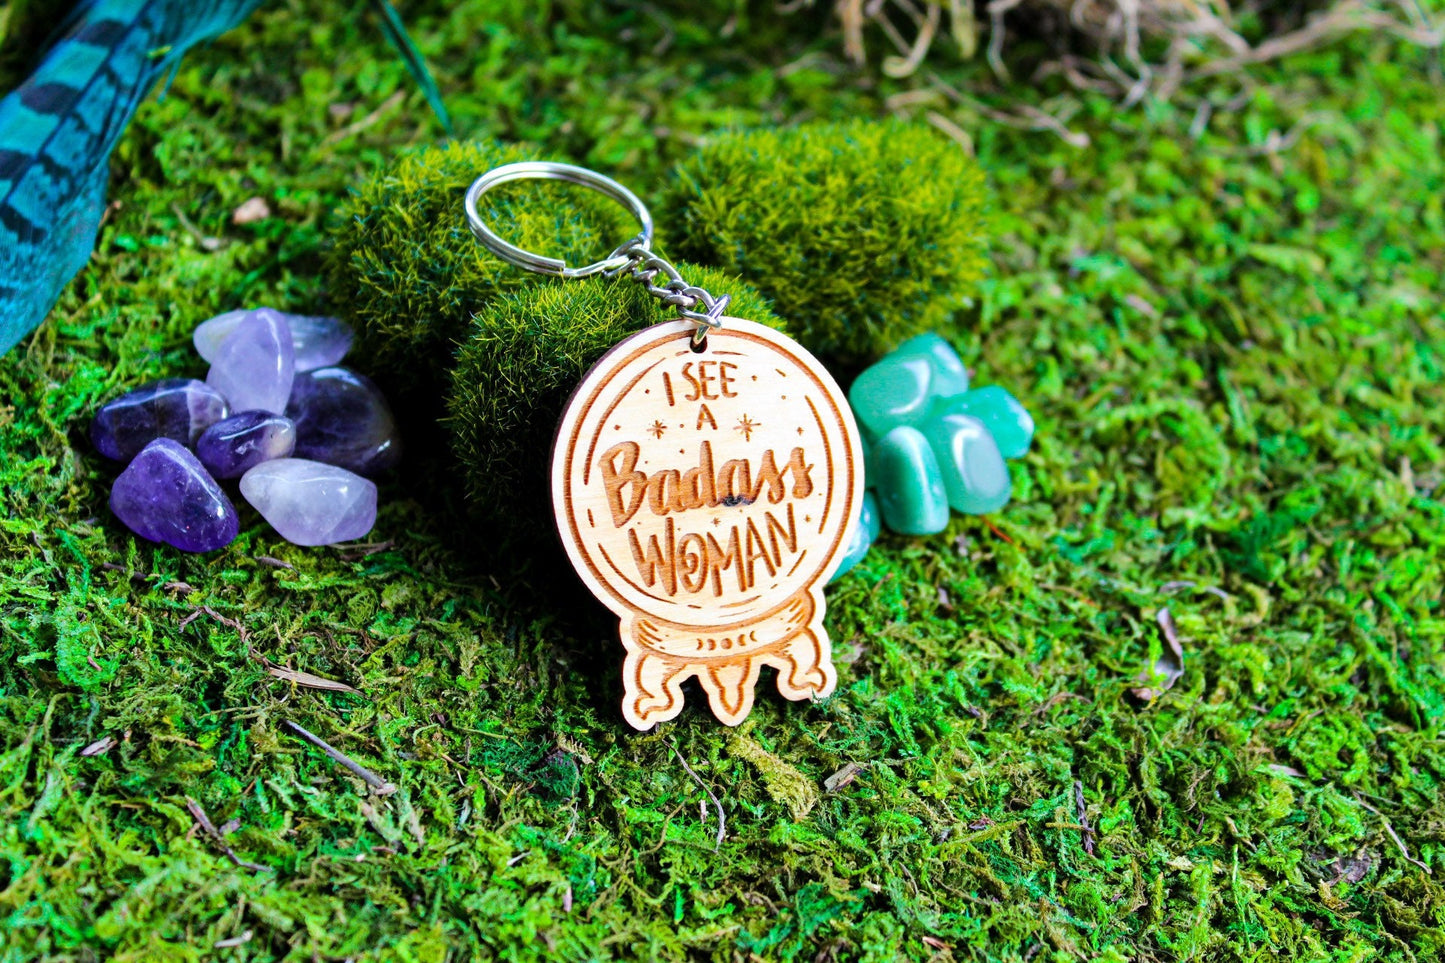 I See A Badass Woman Wooden Empowerment Crystal Ball Engraved Keychain Gift For Medium, Fortune Woman Empowerment Motivational Keychain Gift